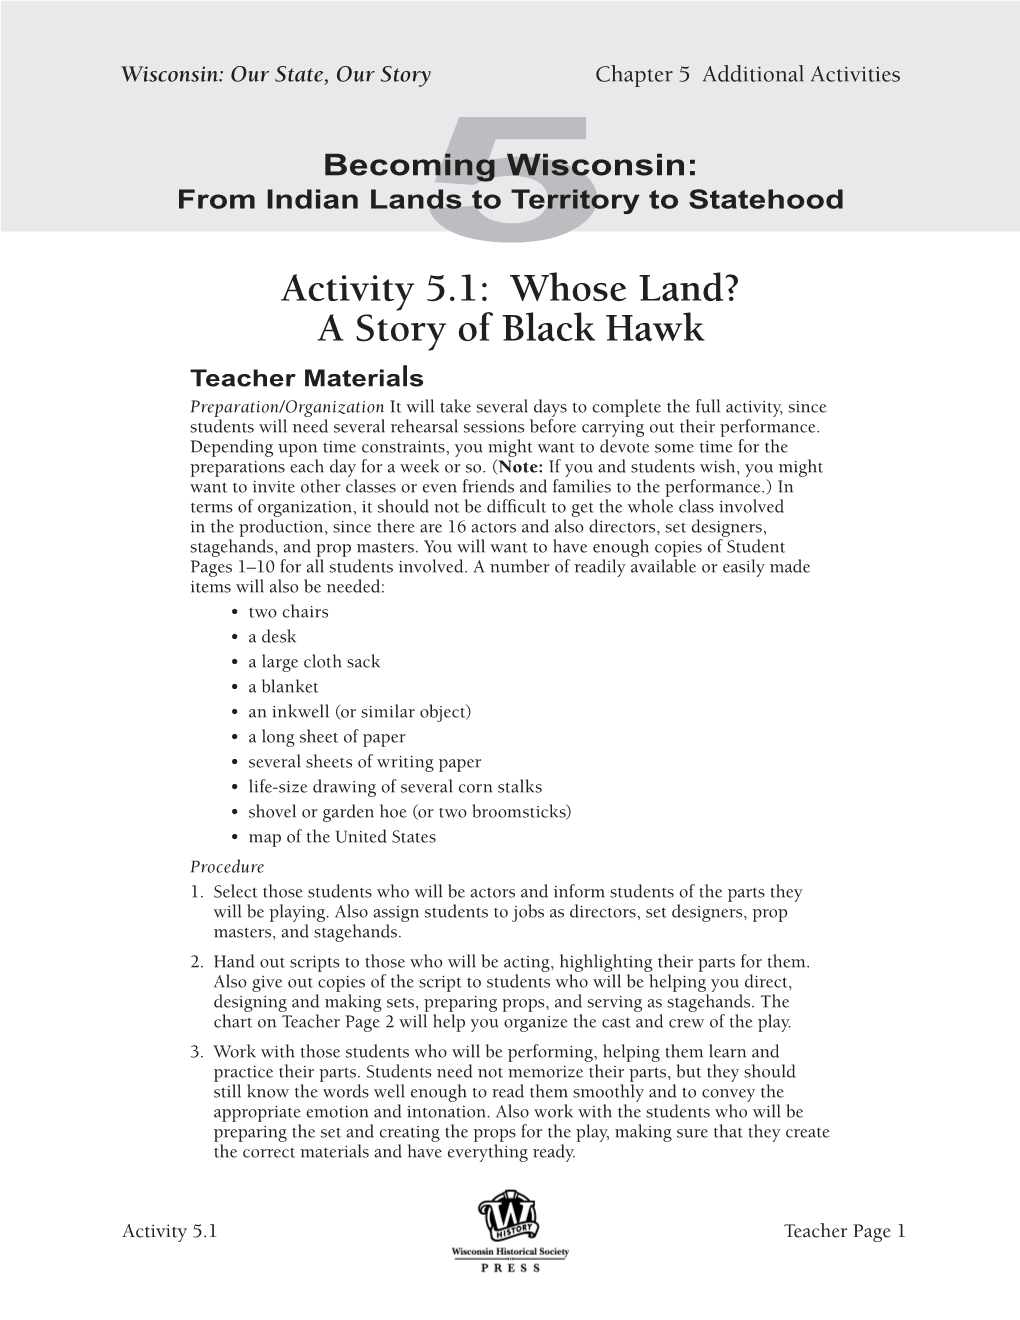 Activity 5.1: Whose Land? a Store of Black Hawk for Wisconsin: Our